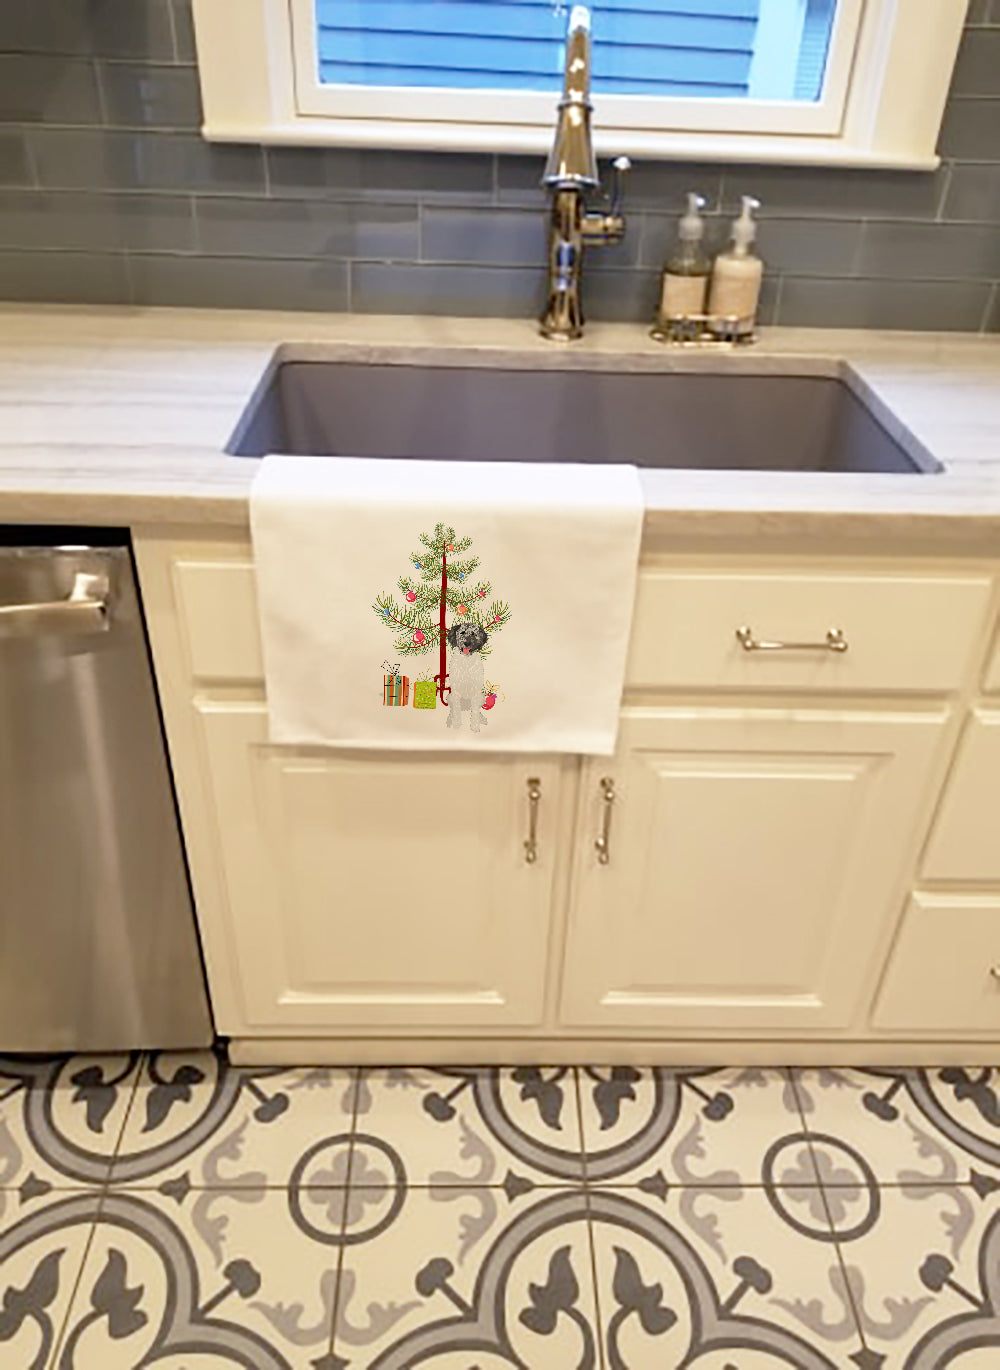 Buy this Doodle Silver #3 Christmas White Kitchen Towel Set of 2